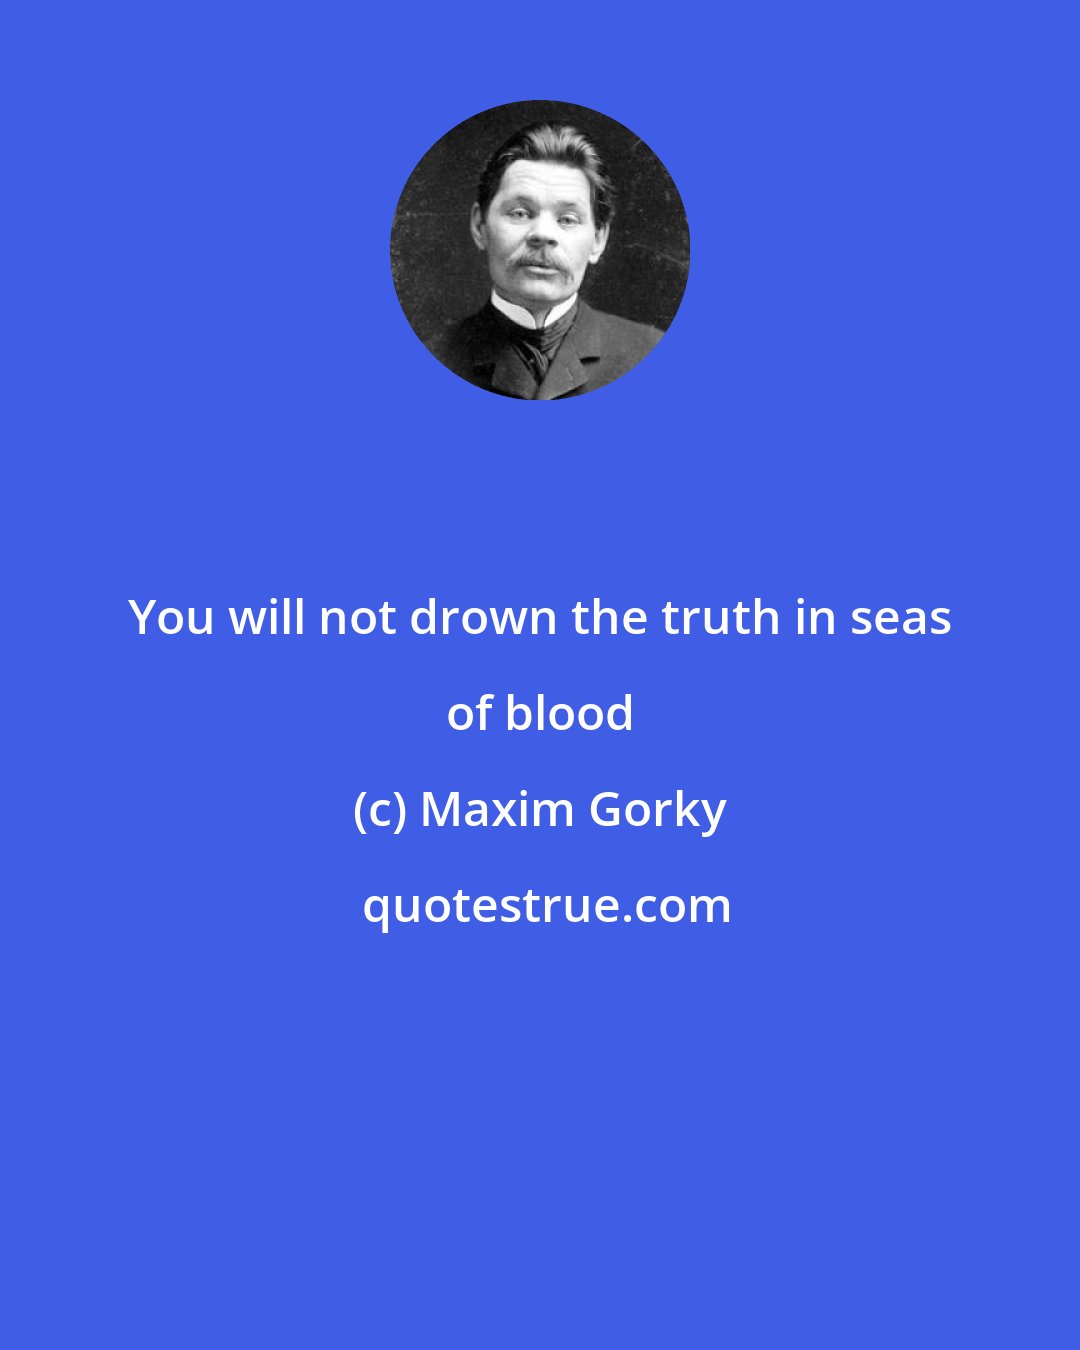 Maxim Gorky: You will not drown the truth in seas of blood